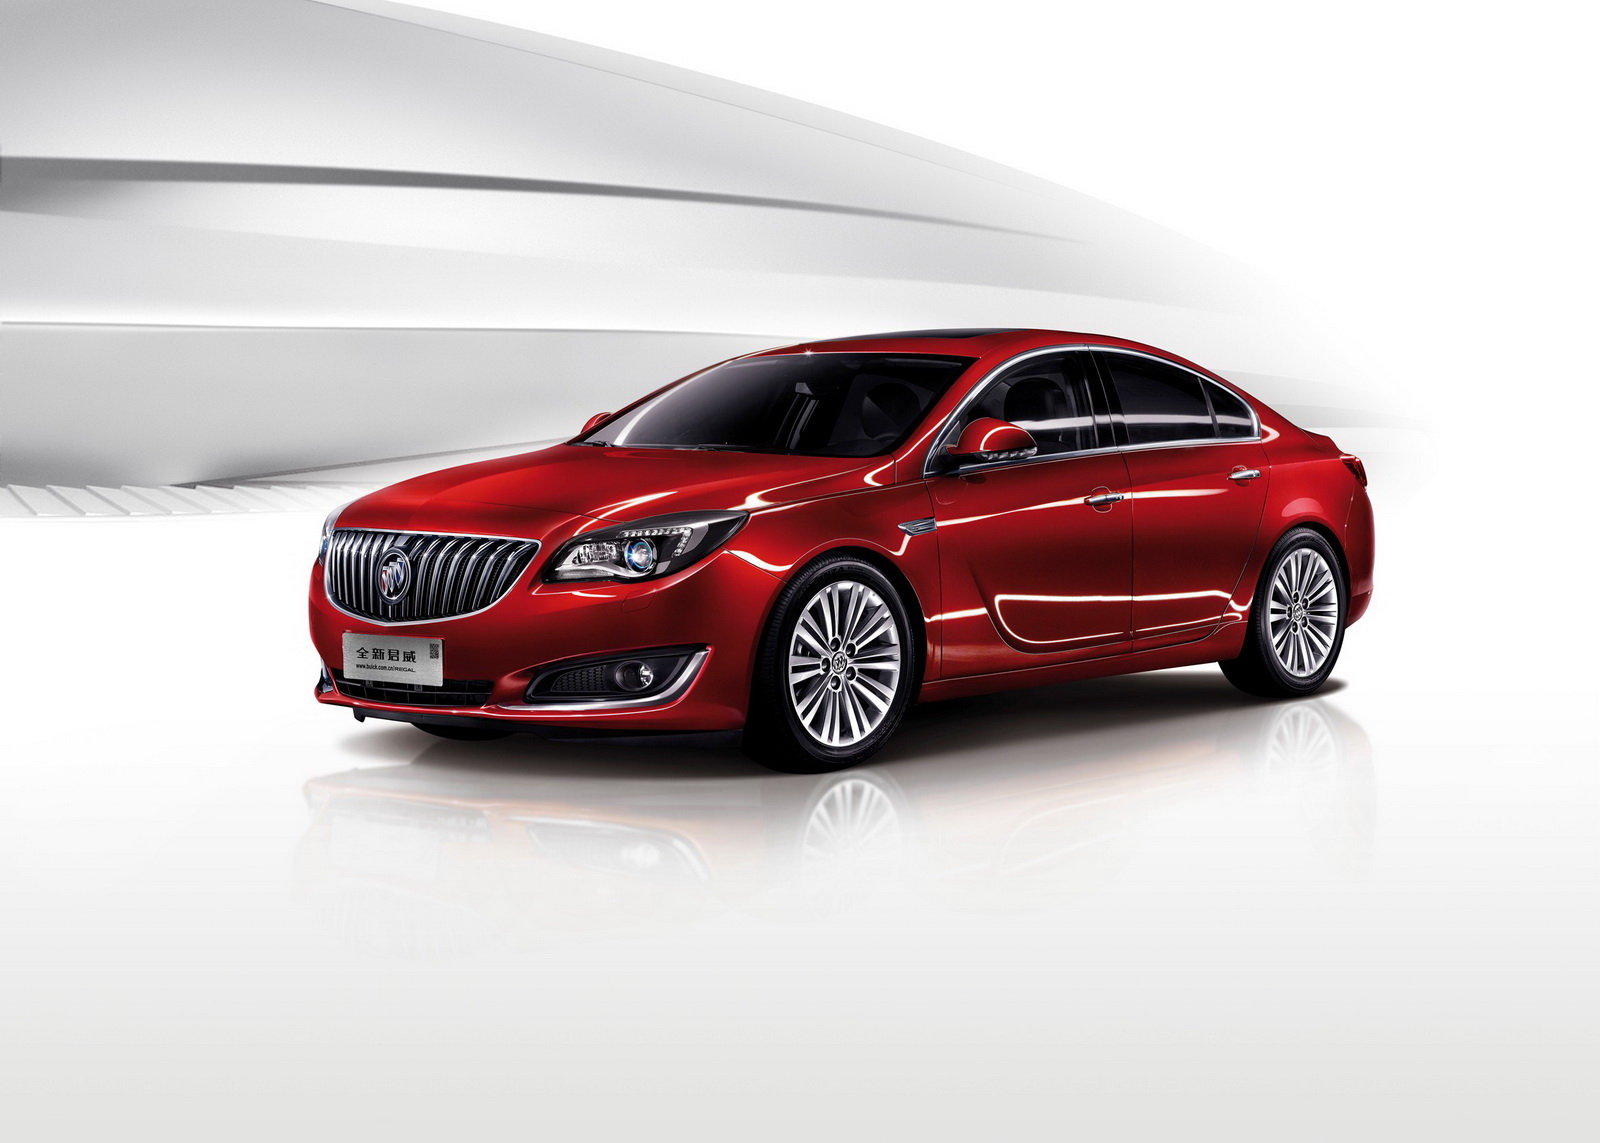 New Buick Regal Gets Standard Active-Hood In China To Protect Pedestrians | Carscoops1600 x 1143